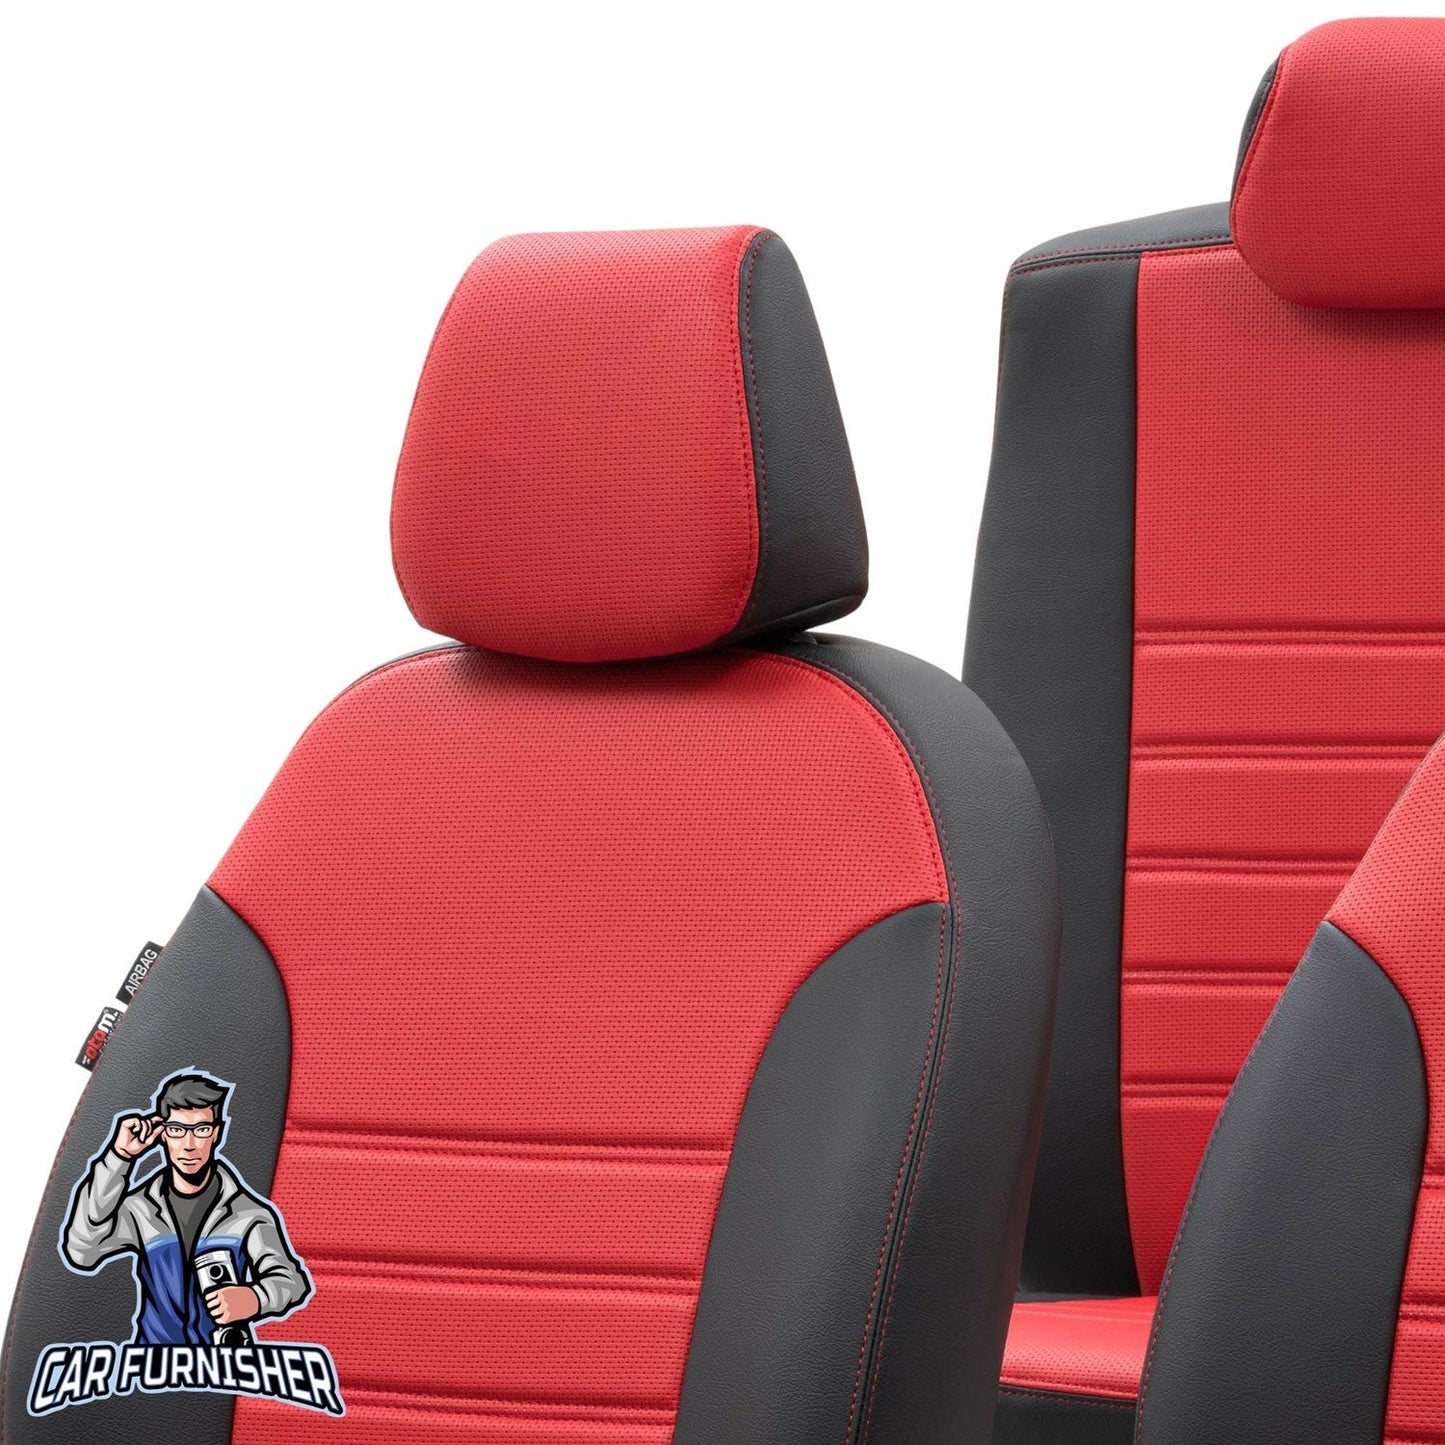 Hyundai Elantra Seat Covers New York Leather Design Red Leather